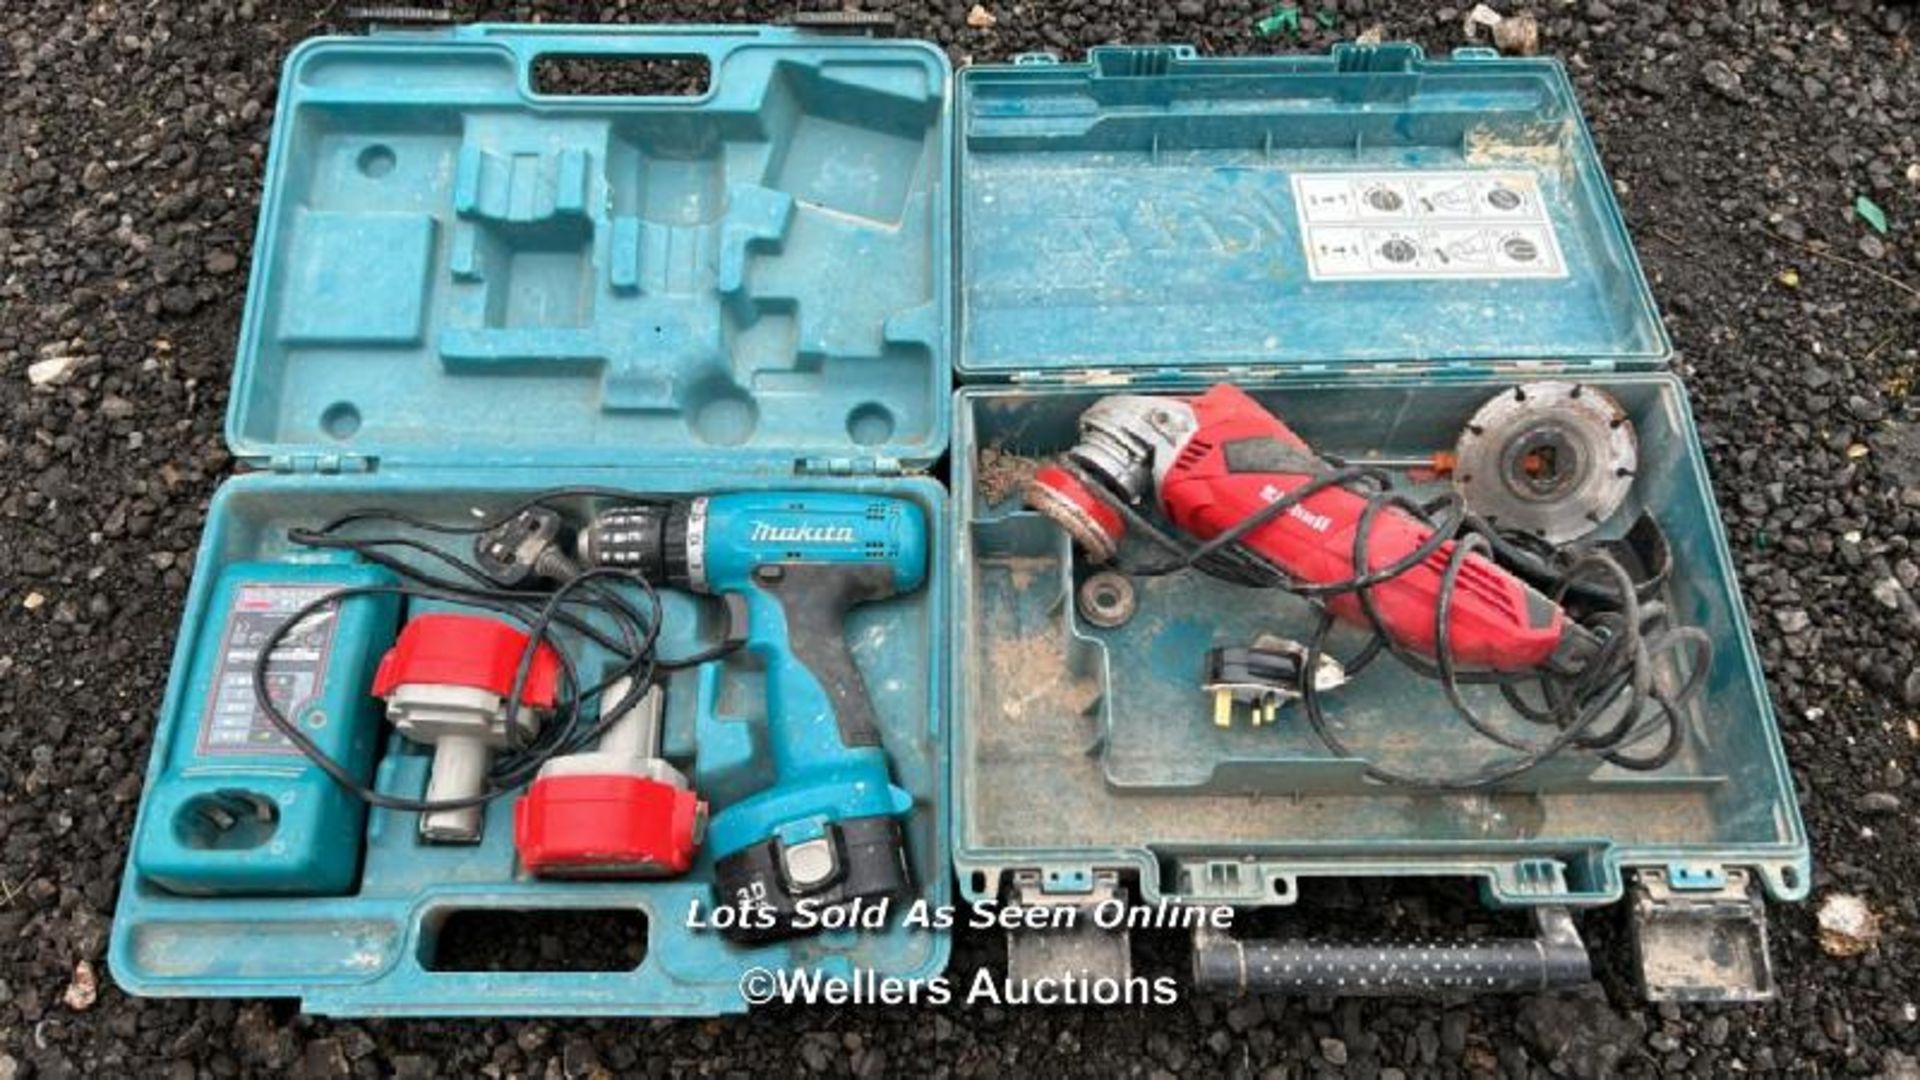 2X POWER TOOLS, INCL. MAKITA 6280D (INCL. 2X BATTERIES AND CHARGER), EINHELL 4" GRINDERETTE